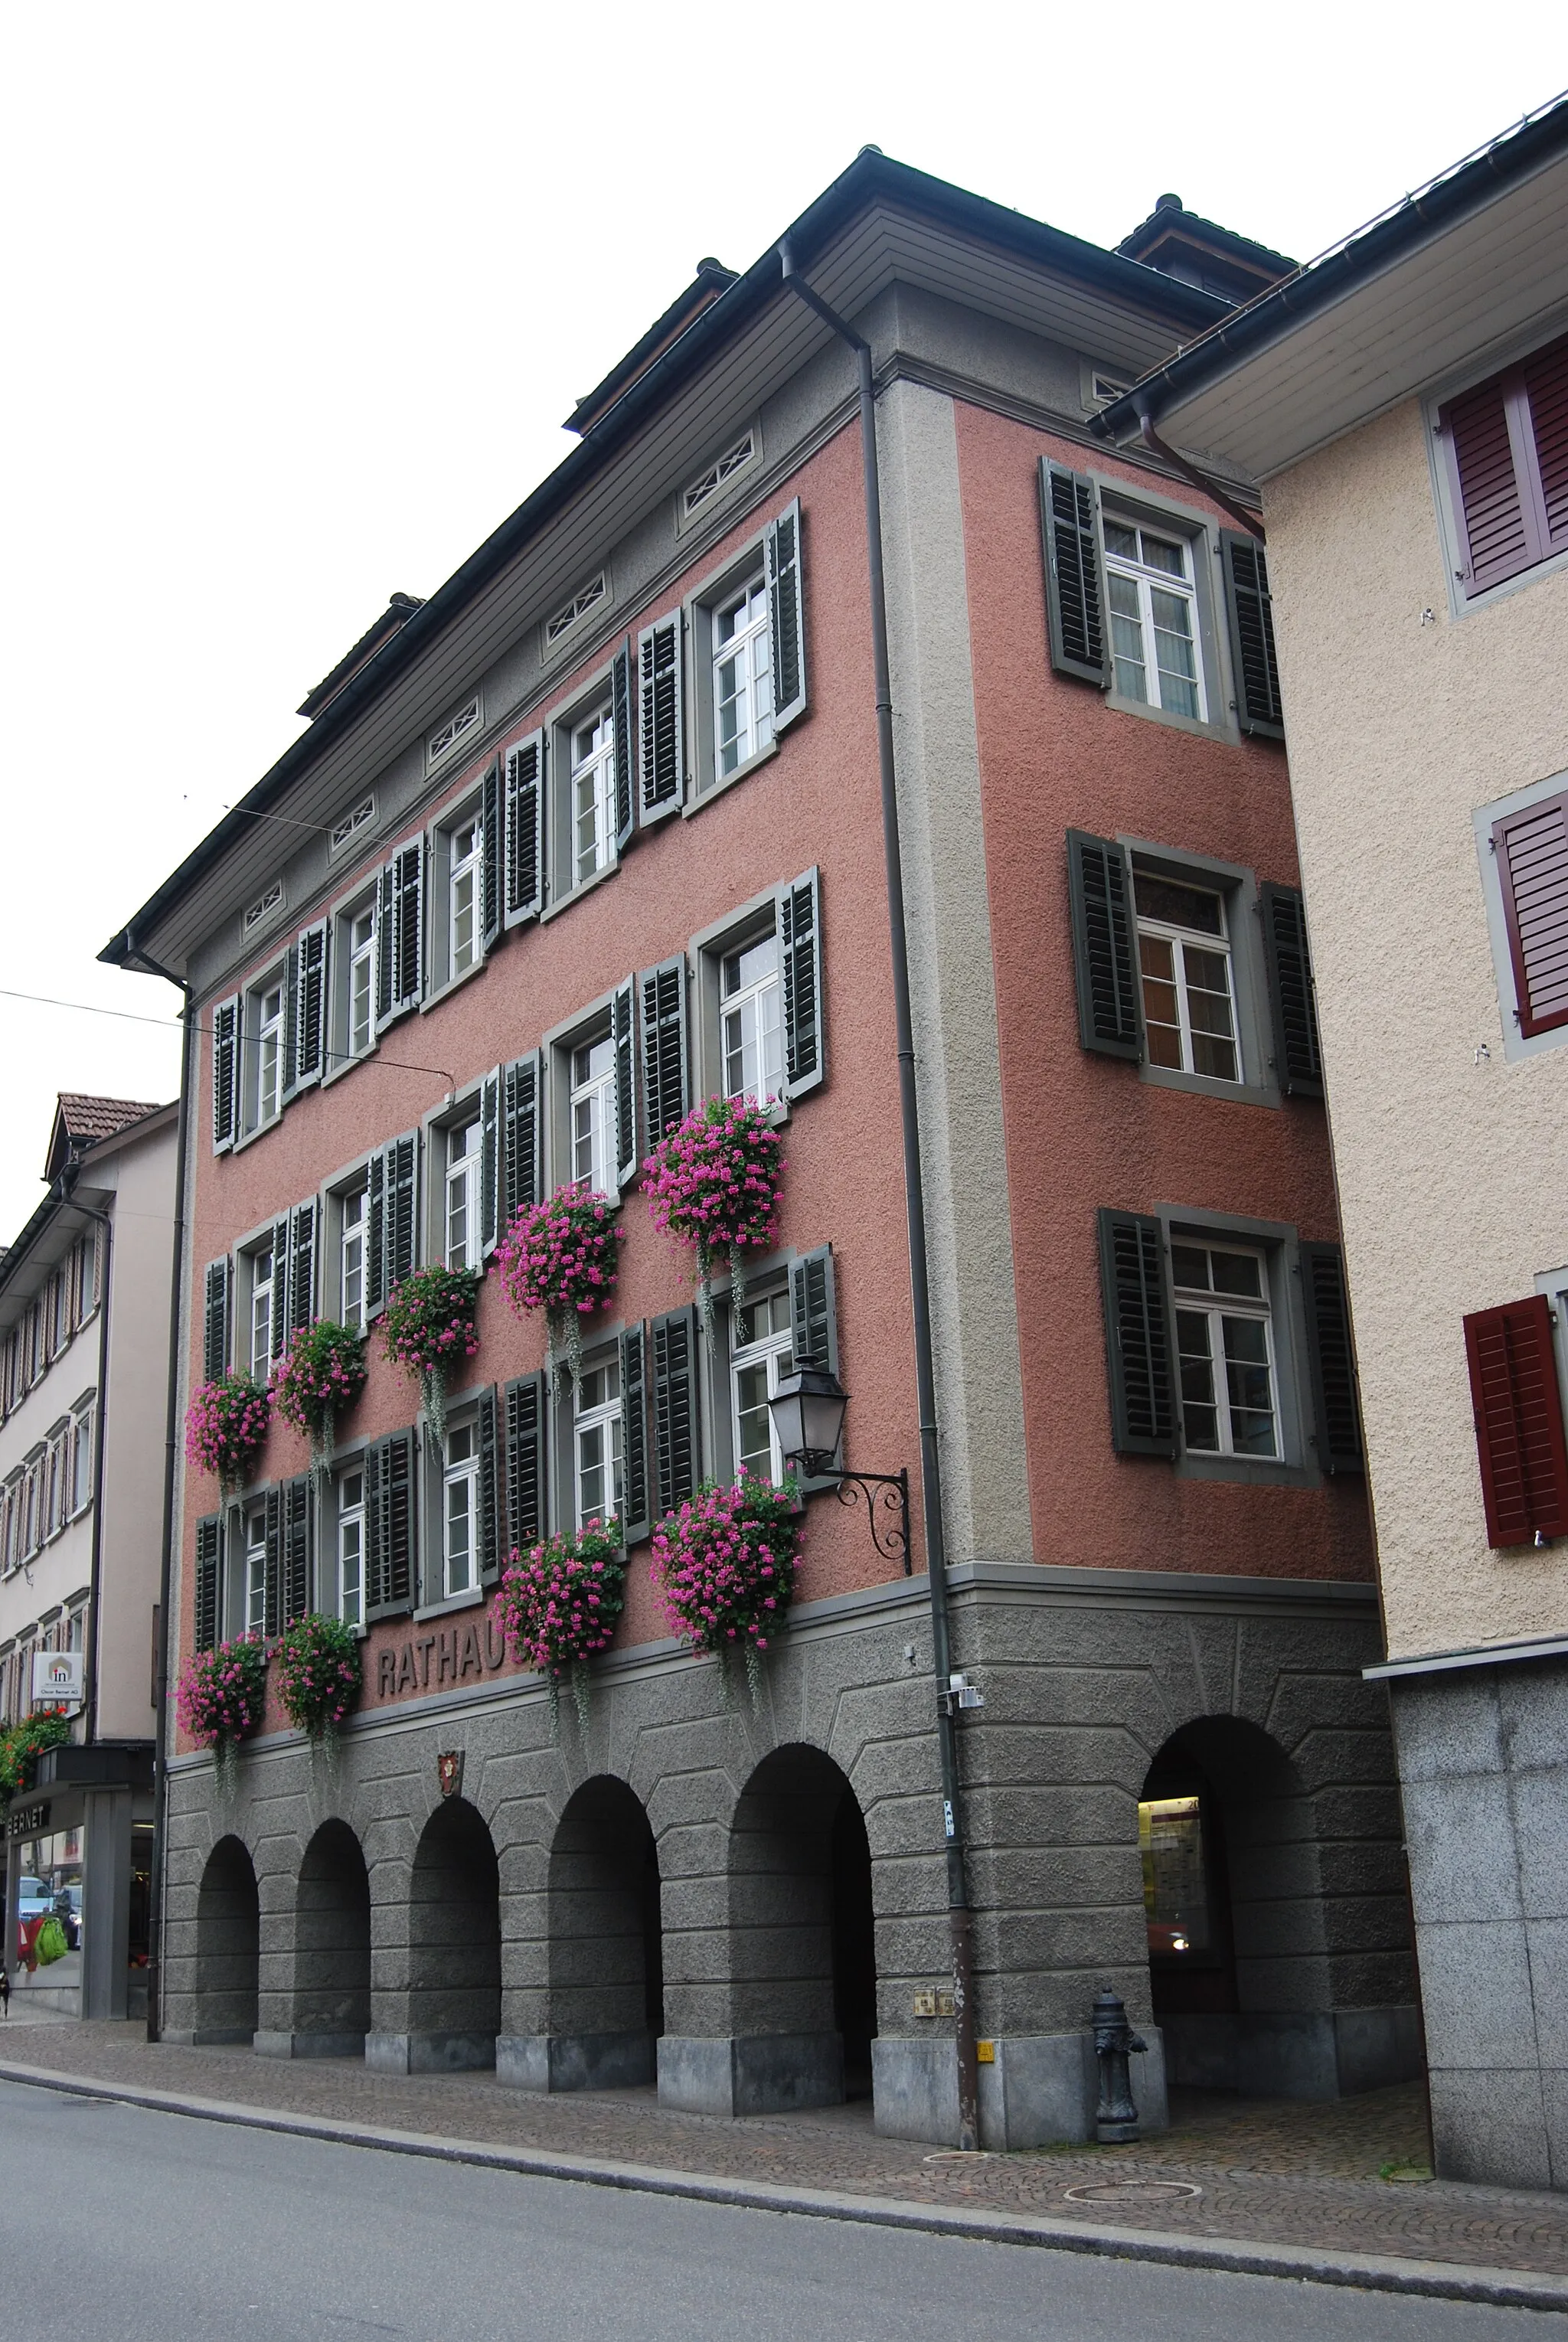 Photo showing: Council house of Uznach, canton of St. Gallen, Switzerland